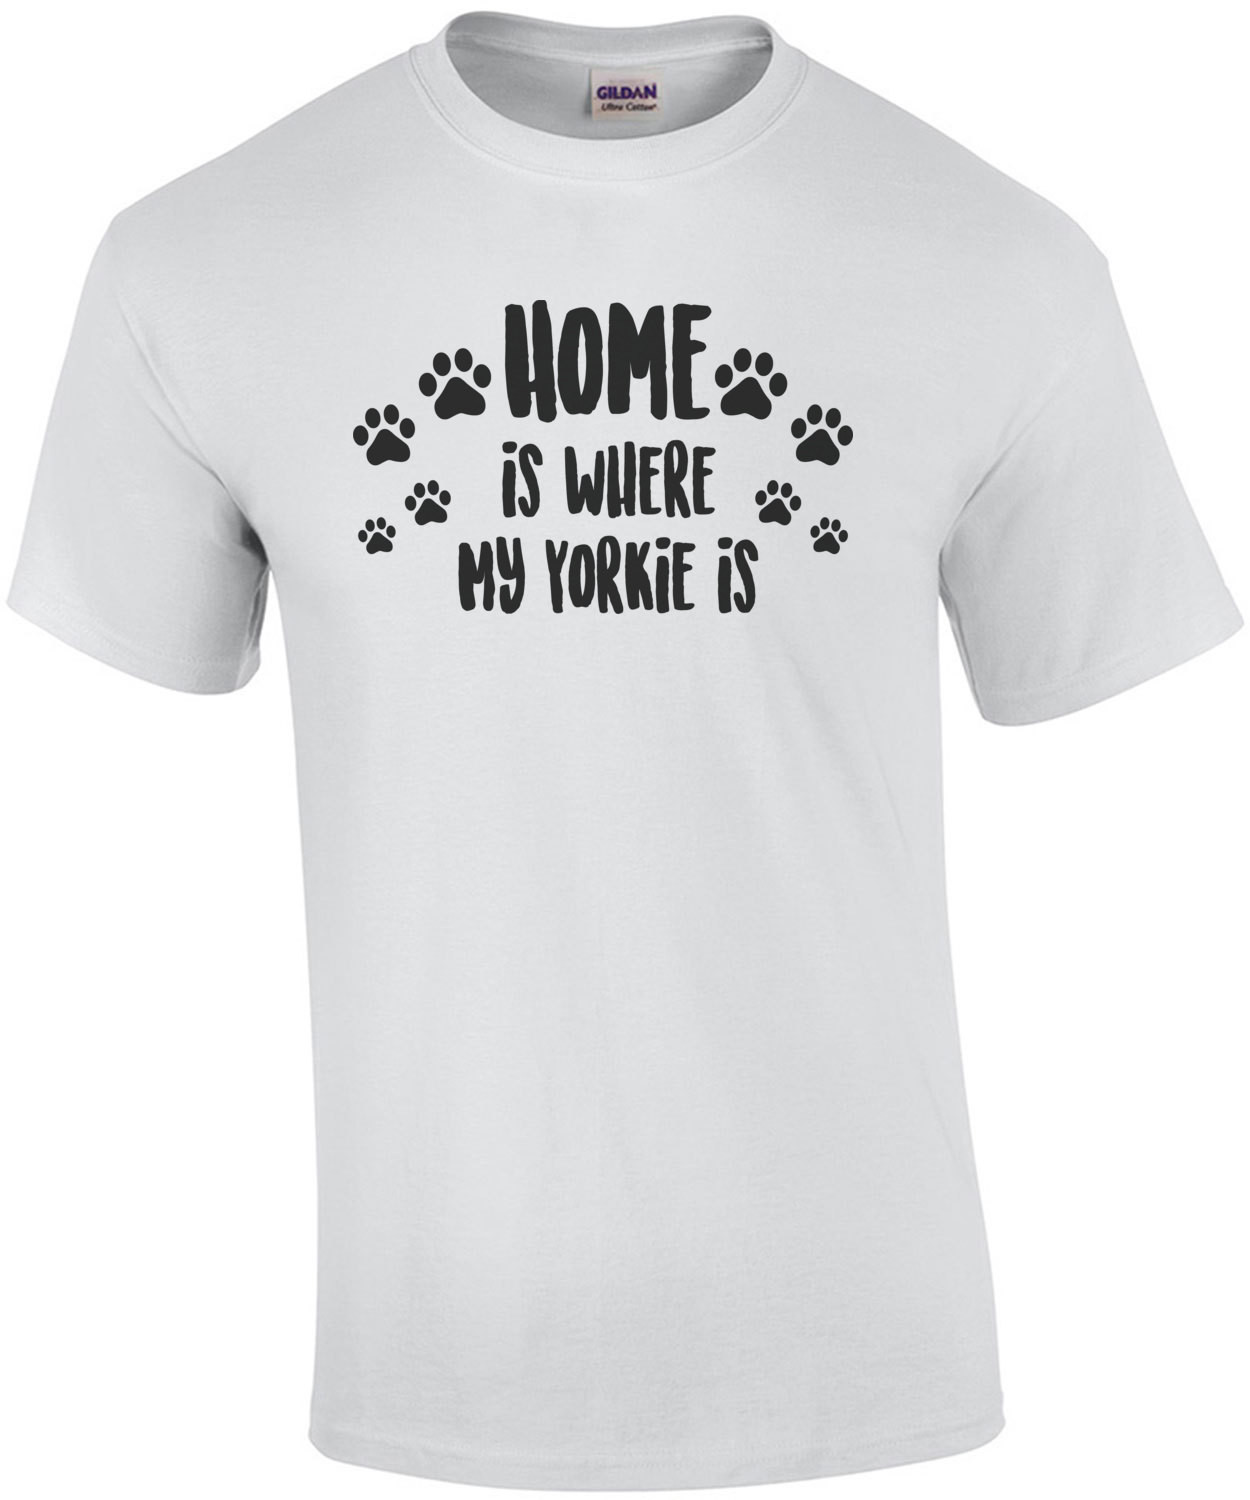 Home is where my yorkie is - Yorkie / Yorkshire Terrier T-Shirt